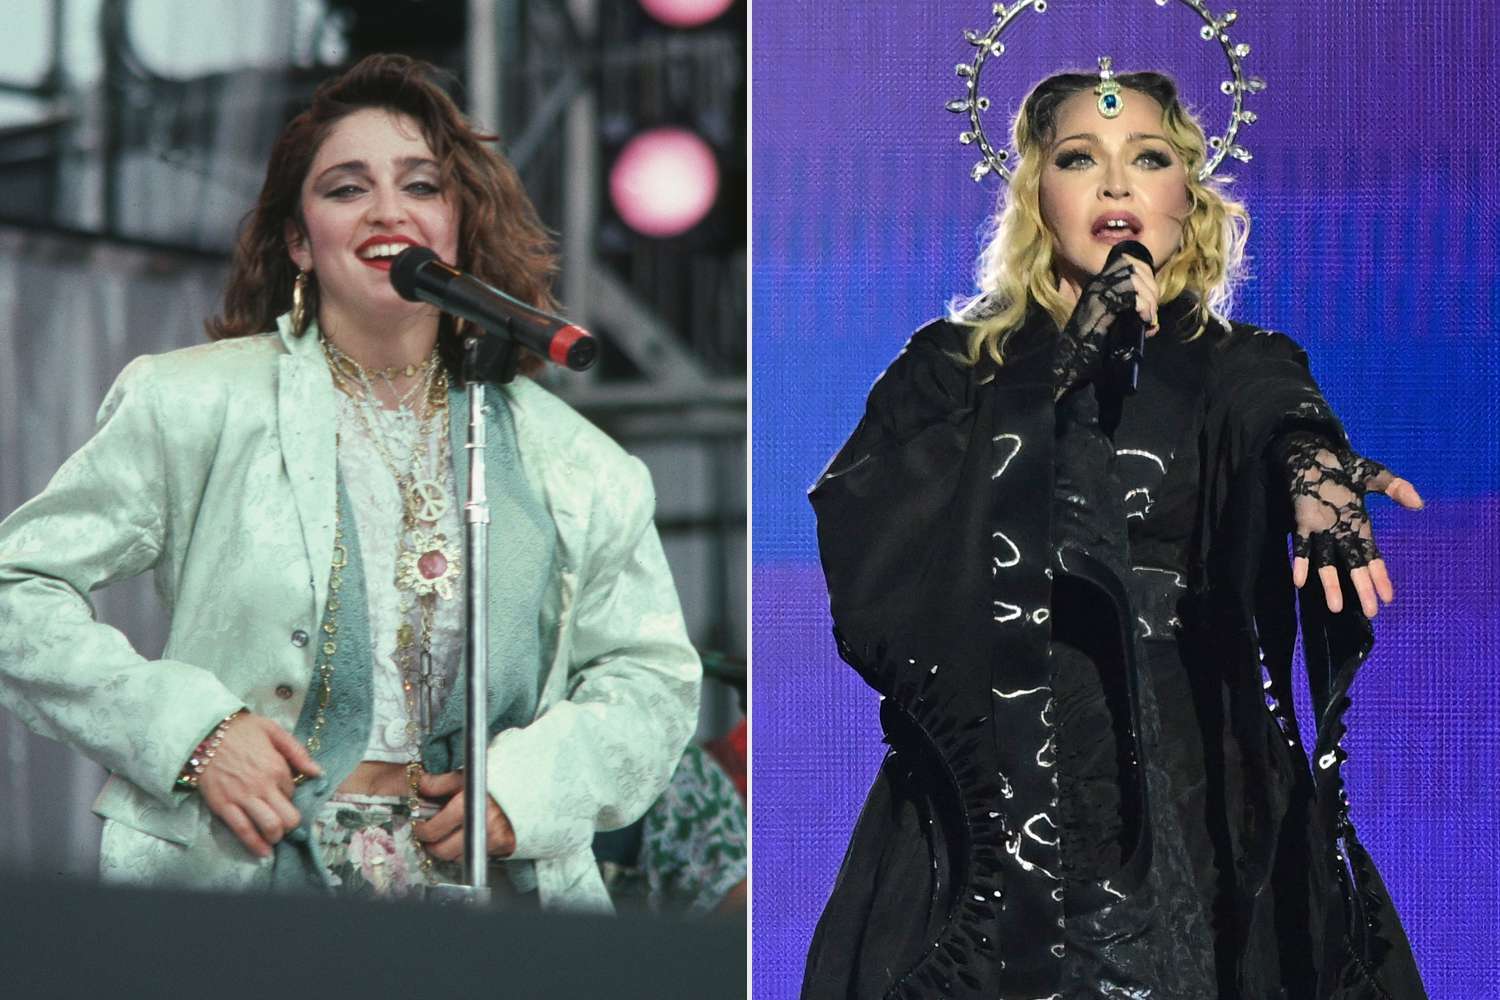 Madonna returns to work on biopic script, reveals title 'Who's That Girl'